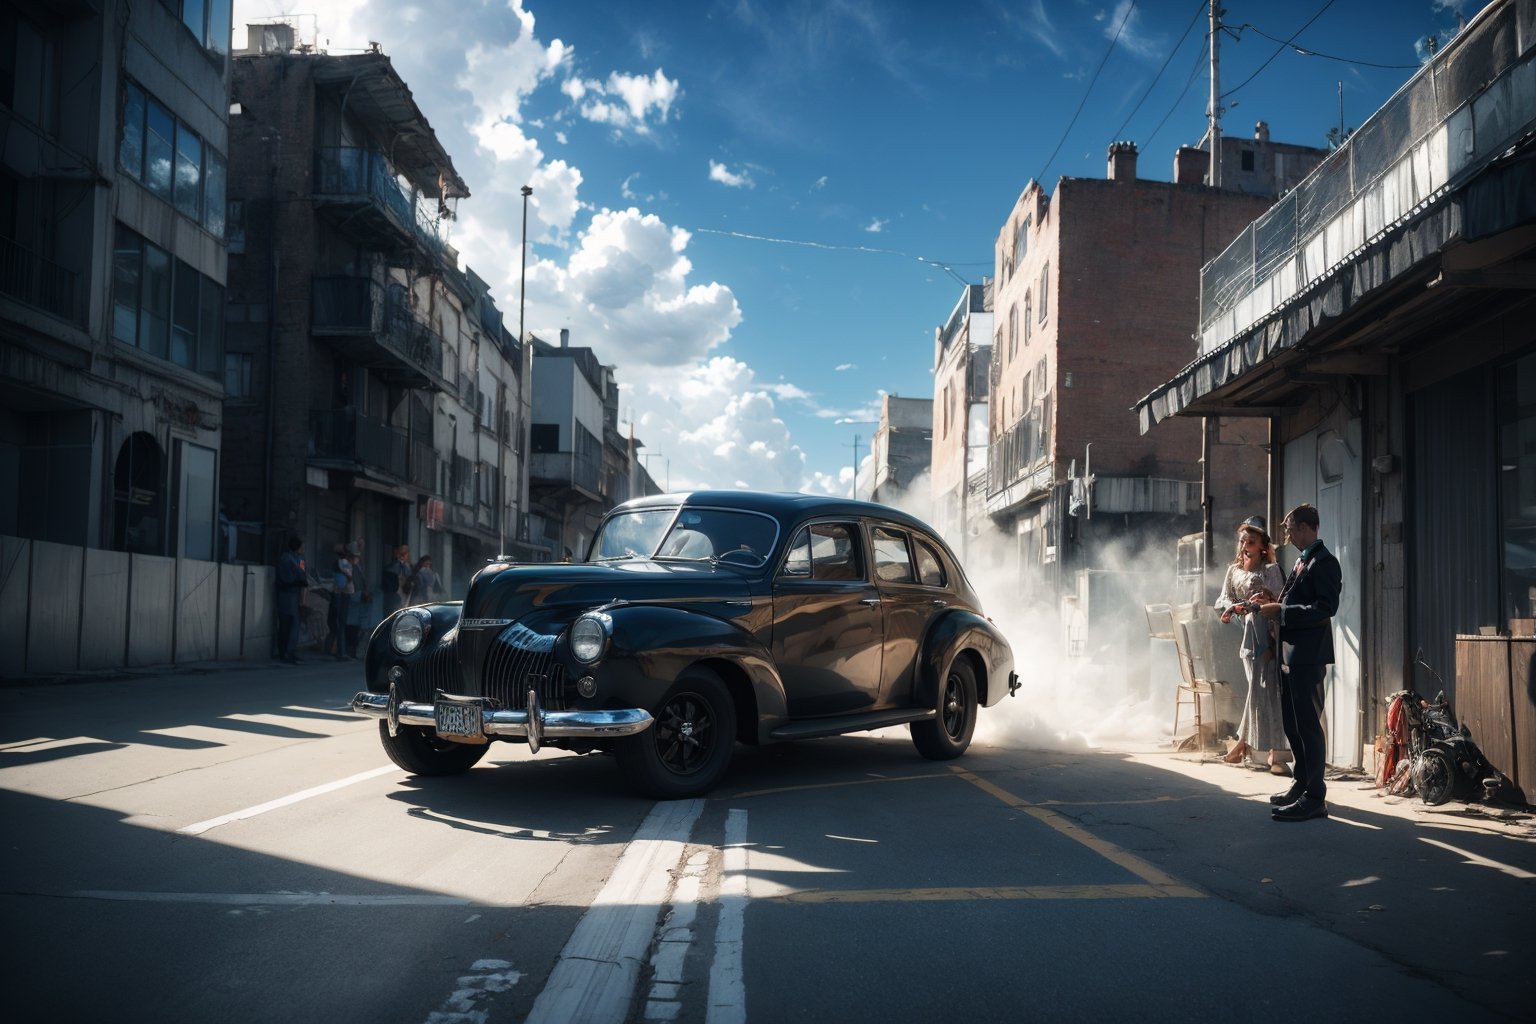 "Generate an enchanting and award-winning masterpiece that transports viewers to the heartwarming era of the 1940s. The central scene should depict a thrilling car race featuring two iconic vehicles from the era: a 1941 Pontiac Streamliner and a 1946 Plymouth Deluxe.

The cars should exude an aura of speed and power, with every detail meticulously rendered. The textures of the metal exteriors should showcase the glint of shiny chrome, and the windows should be polarized and tinted to perfection, adding an air of mystique to the vehicles. Focus on the front of the cars to emphasize their distinct features.

In the foreground, capture a crouching and delighted kid who is eagerly watching the race. The child should be dressed in a charming 1940s-style outfit, complete with a short suit and a classic newsboy hat. The fabric of the clothing and the details of the outfit should be rendered with precision.

The child's eyes should sparkle with excitement and wonder as they gaze upon the racing cars, conveying the joy and nostalgia of the moment. Their expression should evoke a sense of happiness and anticipation, reminding viewers of the simple joys of childhood.

Infuse the scene with a vibrant and cinematic color palette, enhancing the nostalgic atmosphere of the 1940s. Ensure that the entire scene is well-illuminated, capturing the warmth of the daytime sun. Utilize dramatic illumination to add depth and dimension to the composition, casting dynamic shadows and highlights.

Implement High Dynamic Range (HDR) techniques to capture a wide range of tones and colors, enhancing the visual impact of the artwork. This masterpiece should be created in an astonishing 32k resolution, allowing viewers to appreciate every nuance and detail.

Ultimately, this artwork should be an emotionally resonant and award-winning portrayal of a 1940s car race, evoking feelings of happiness, nostalgia, and the timeless wonder of childhood."